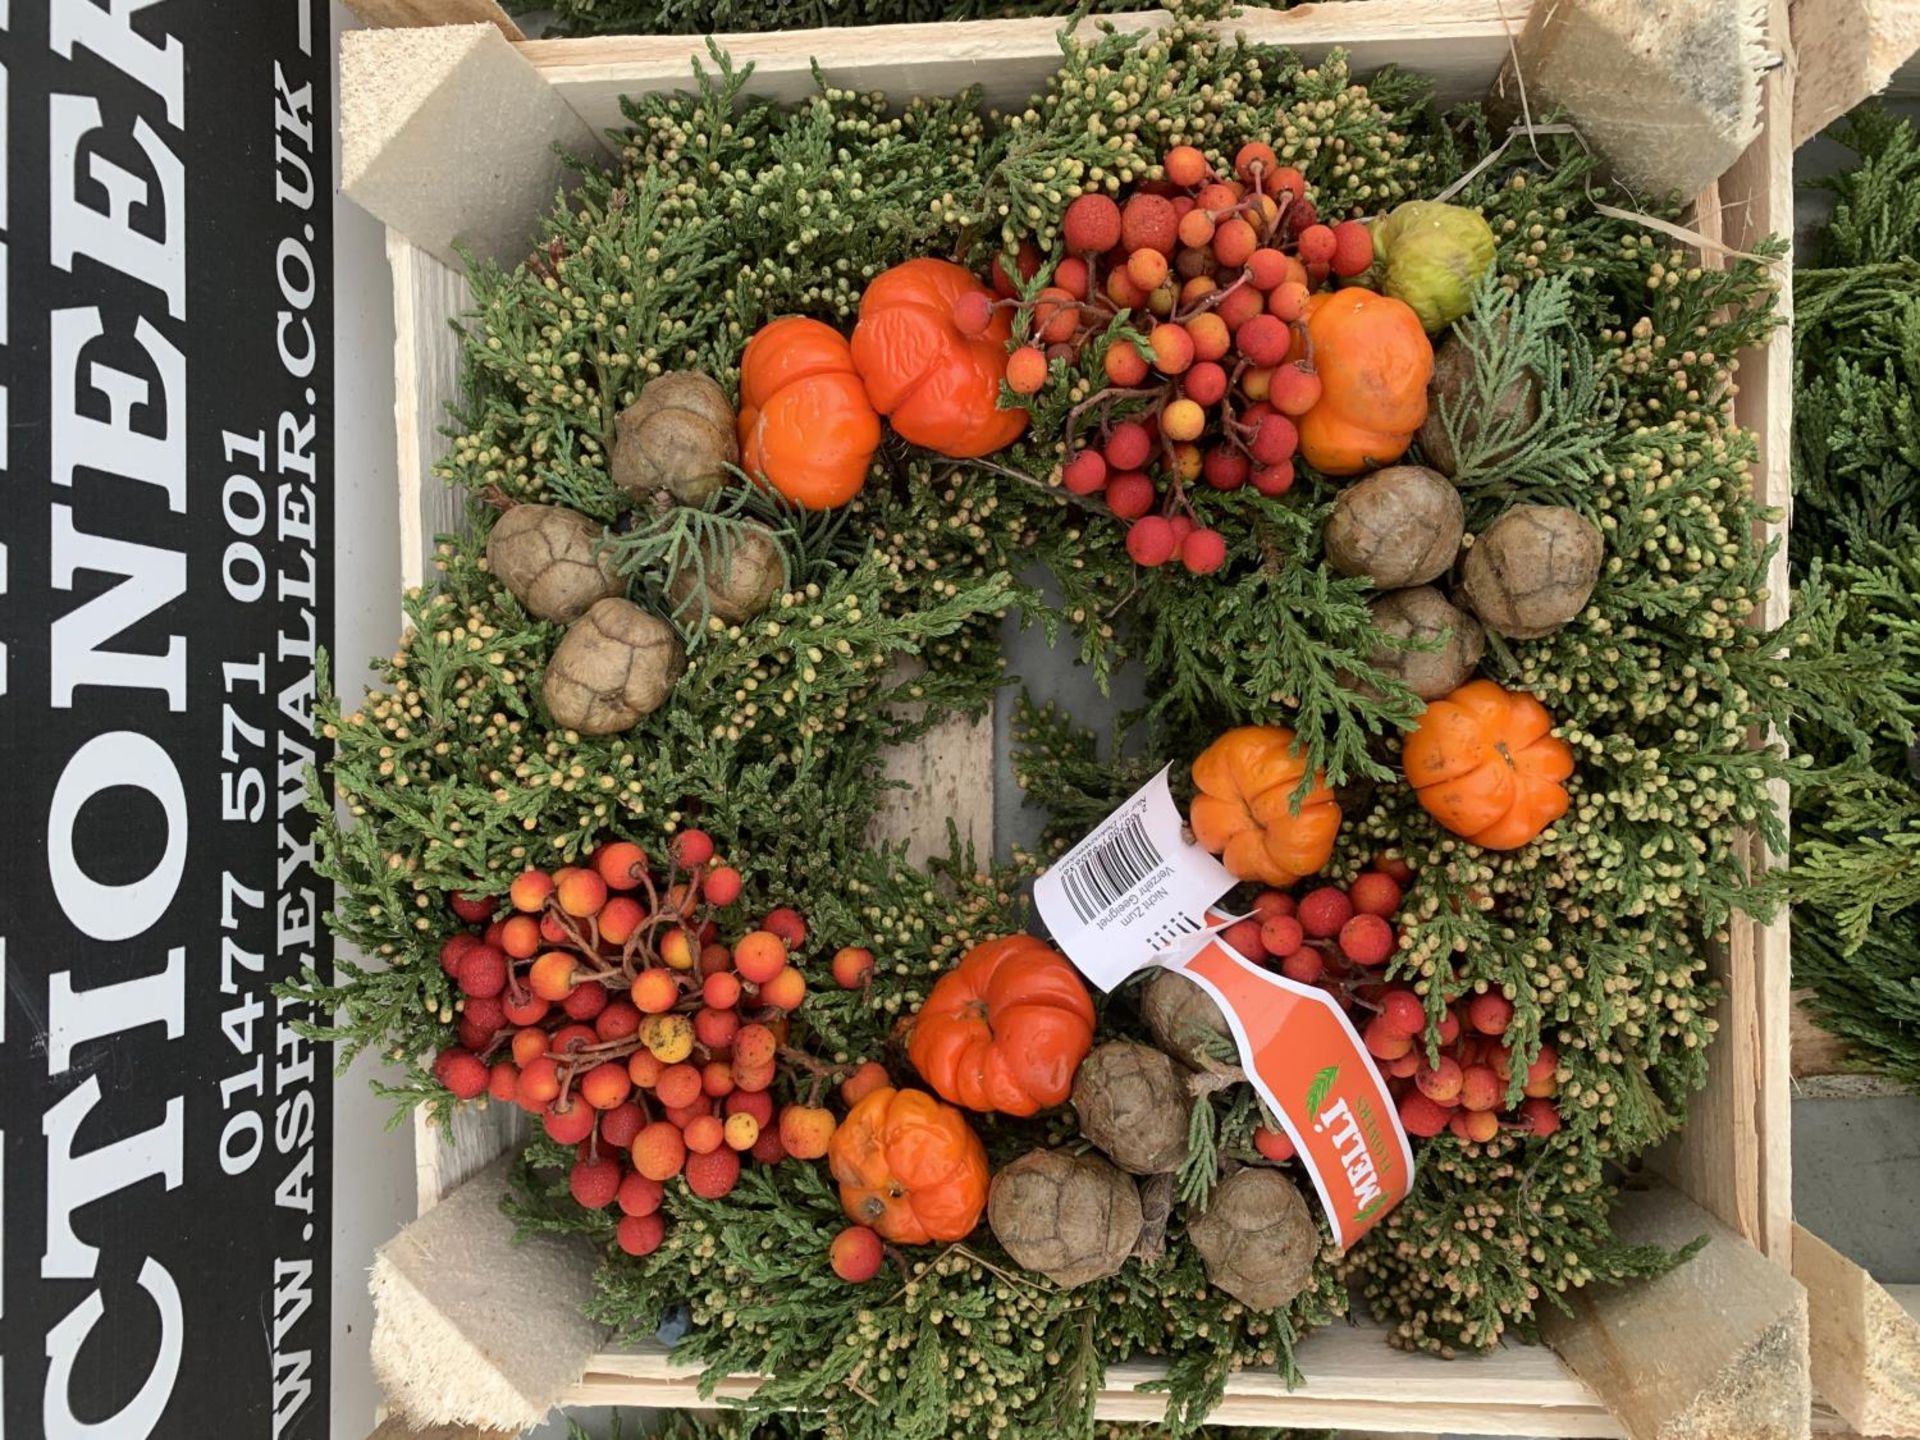 SIX WINTER WREATHS WITH VARIOUS FRUITS AND BERRIES IN A PRESENTATION CRATE + VAT TO BE SOLD FOR - Image 4 of 9